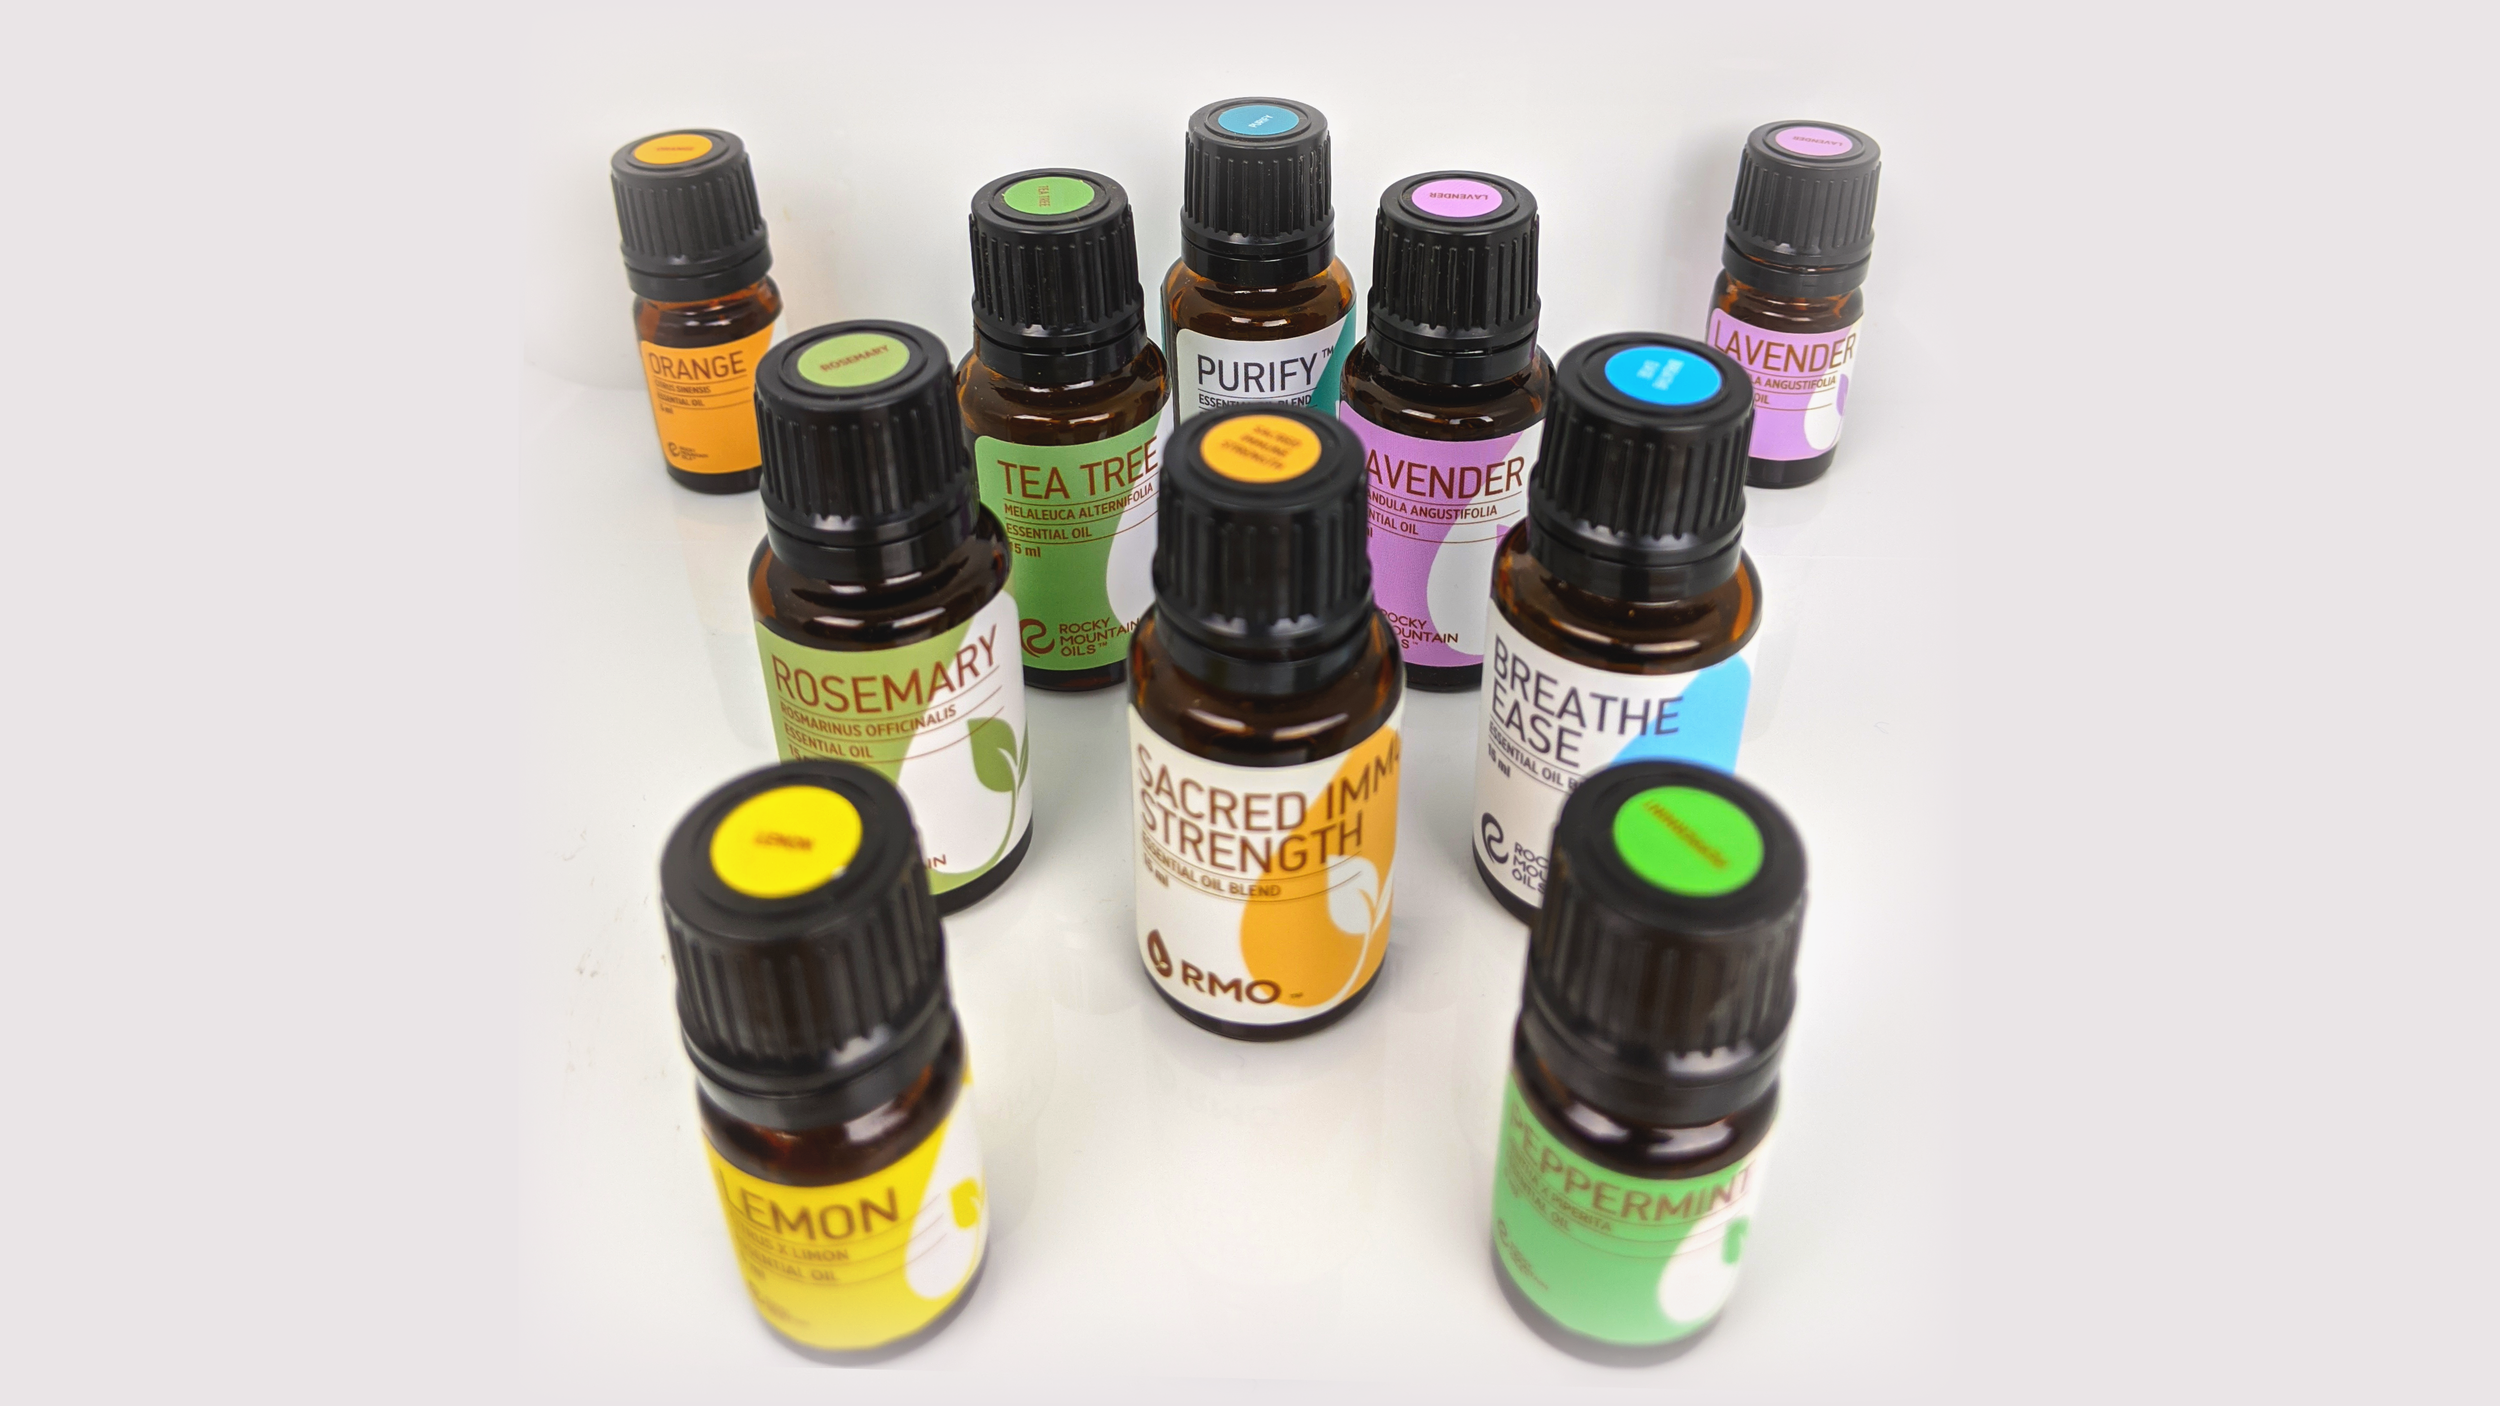 I use a different essential oil blend in my DIY shampoo each time, personally. But I always buy my oils from  Rocky Mountain Oils . Click the image to view their oil selection.